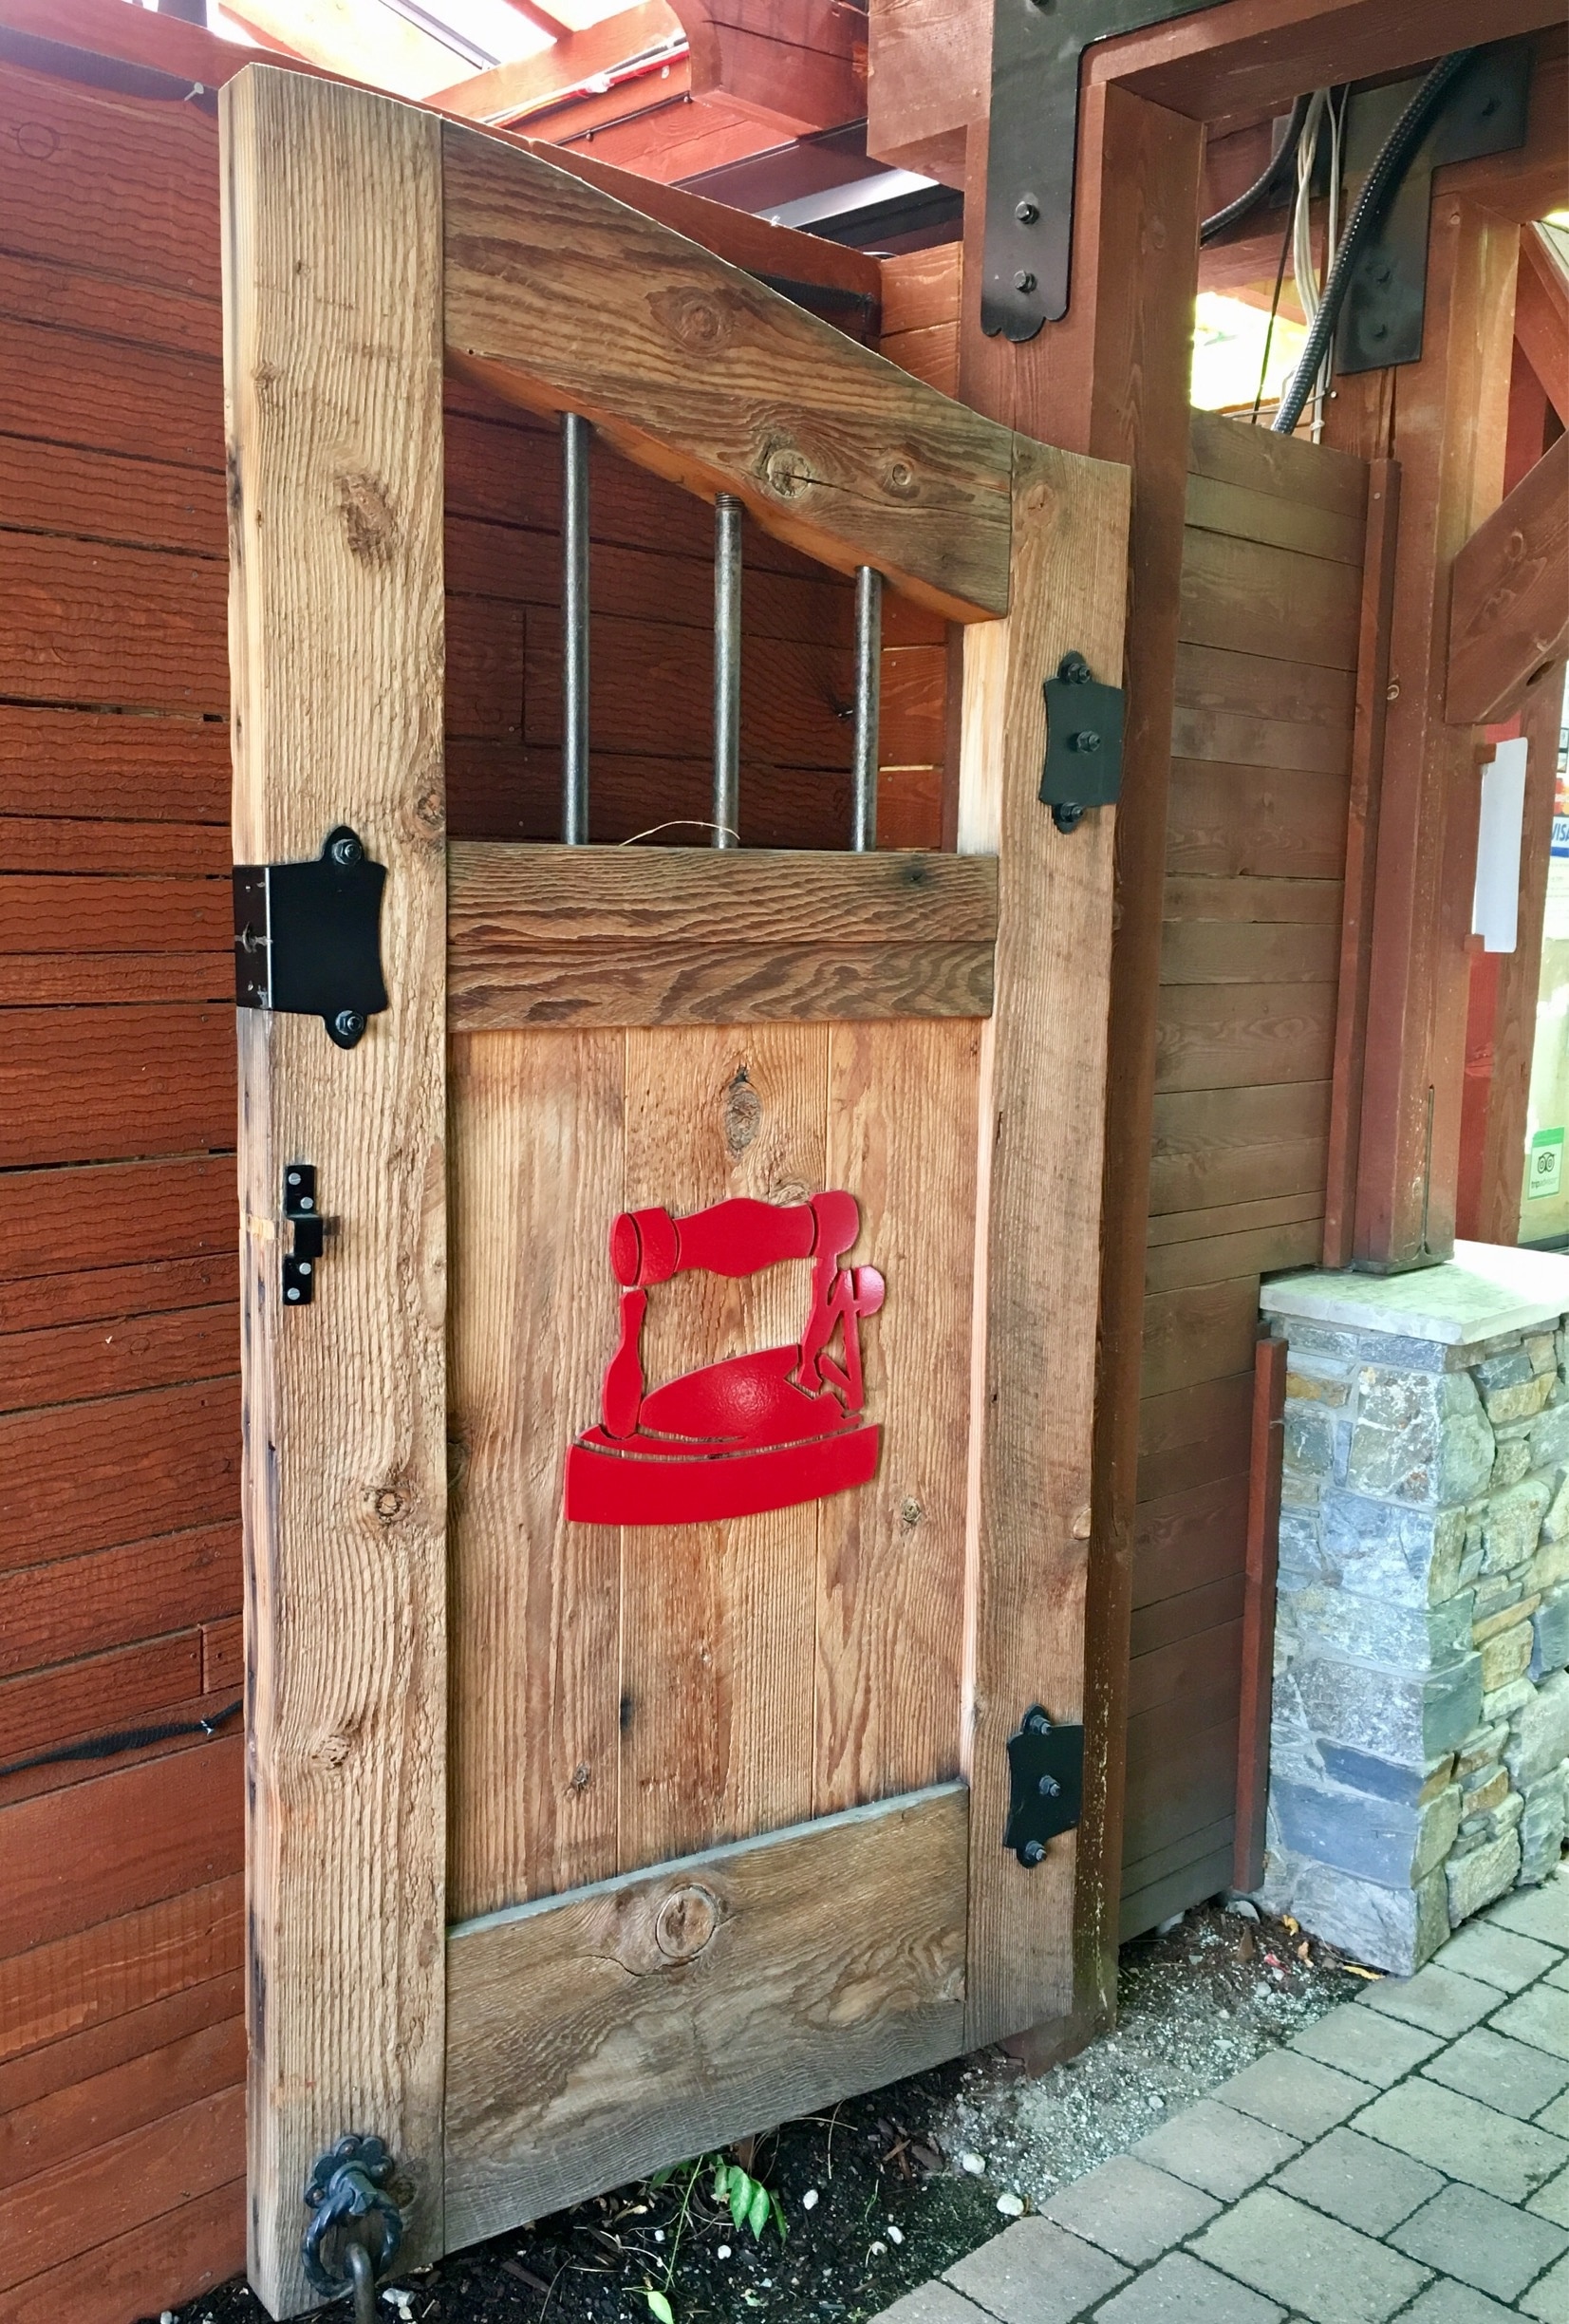 Entry to patio at Dirty Laundry Vineyard in Summerland, BC. 

#BritishColumbia #doors
#winery

(Sept 2017)